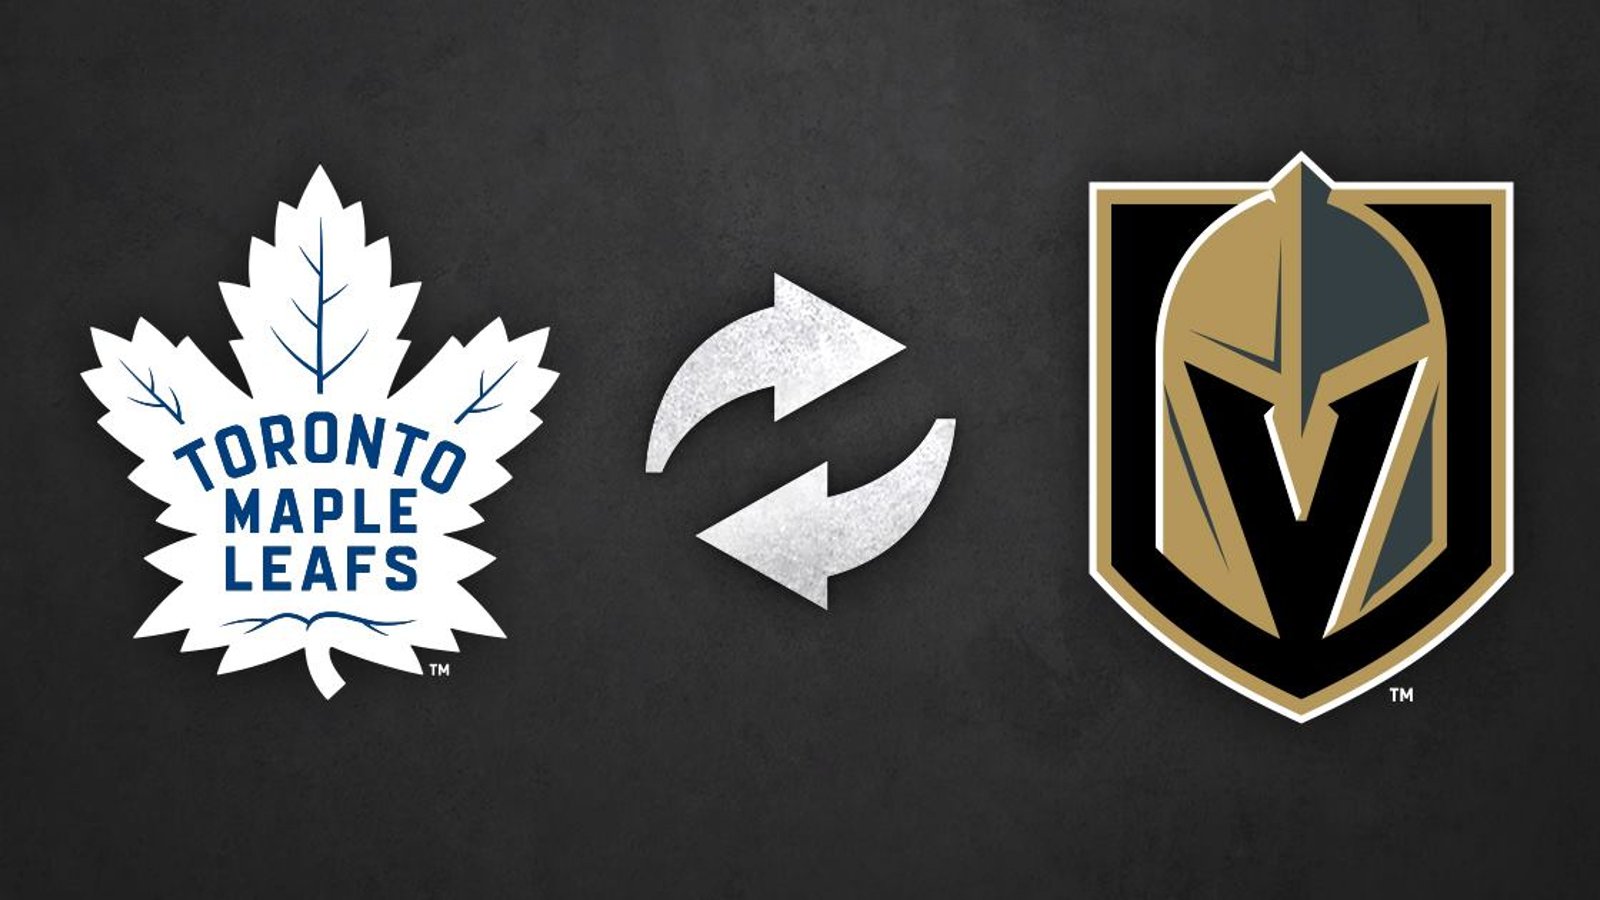 Proposed trade between the Maple Leafs and Golden Knights.